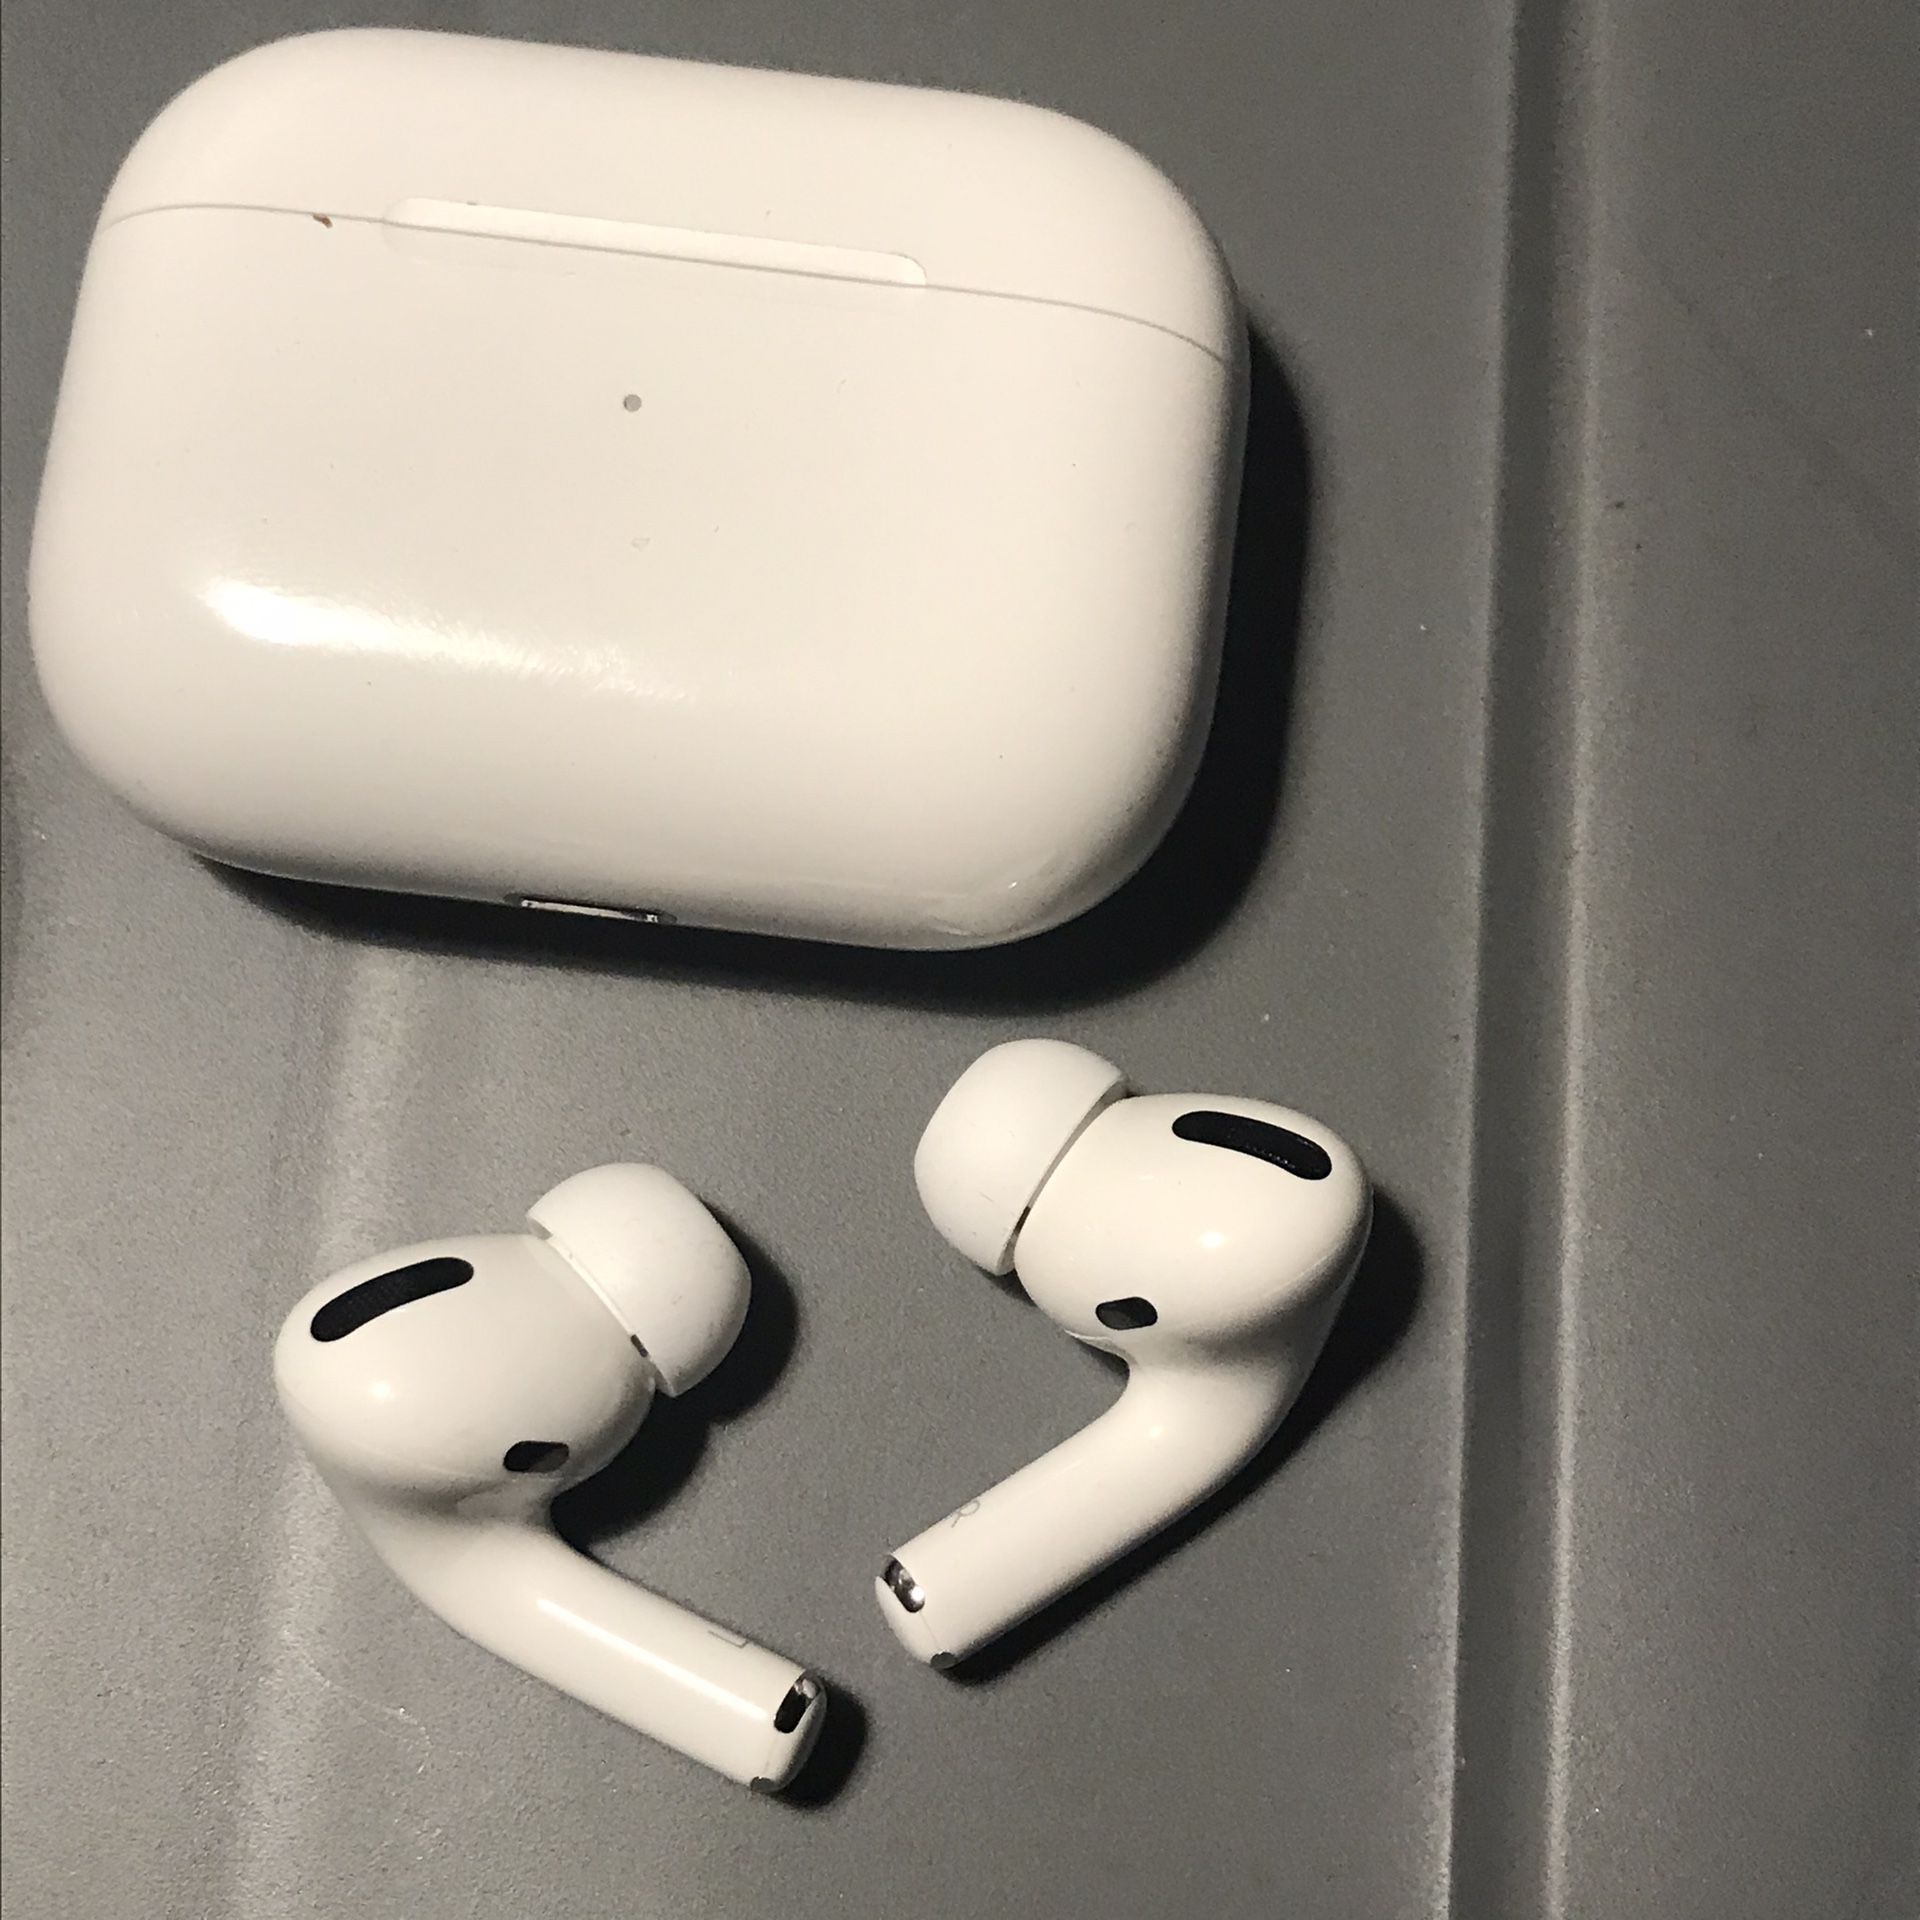 Apple AirPods Pro (authentic)